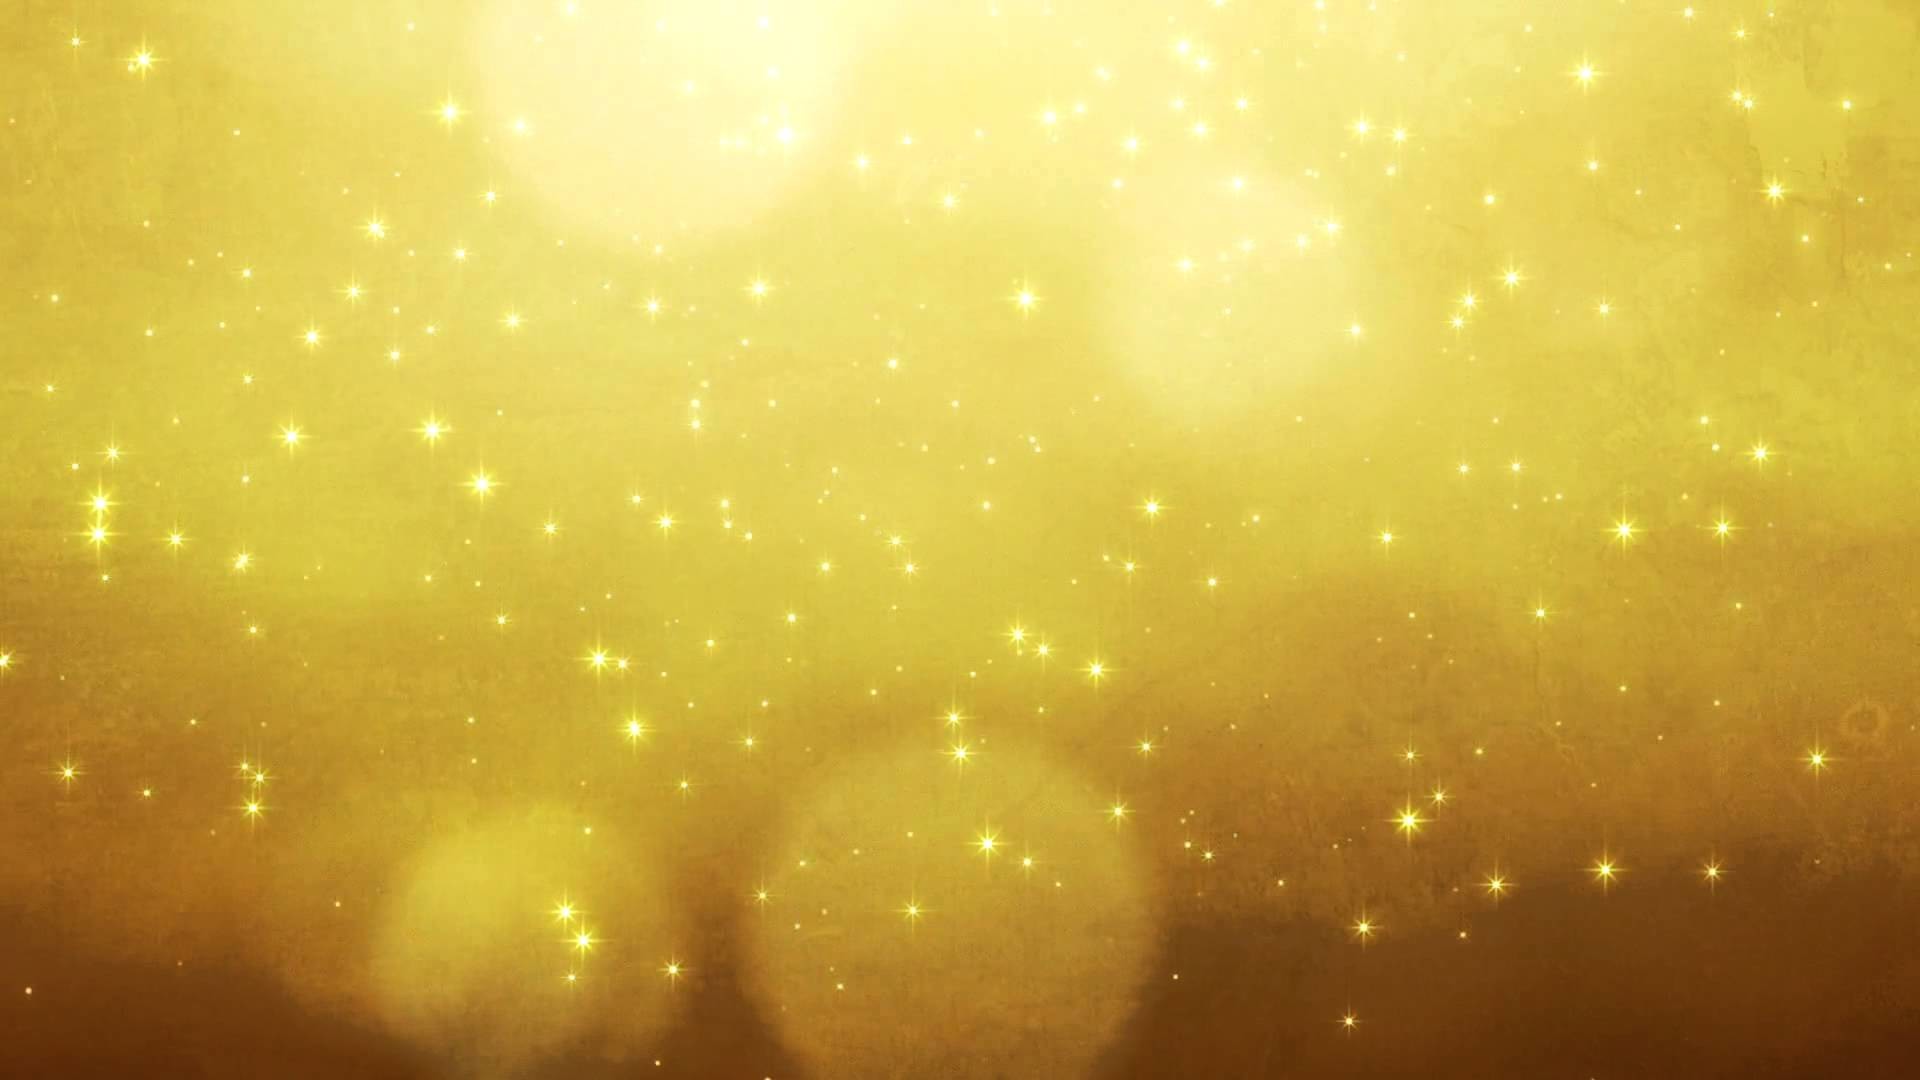 1920x1080 Displaying 17> Images For - Gold Glitter Background.